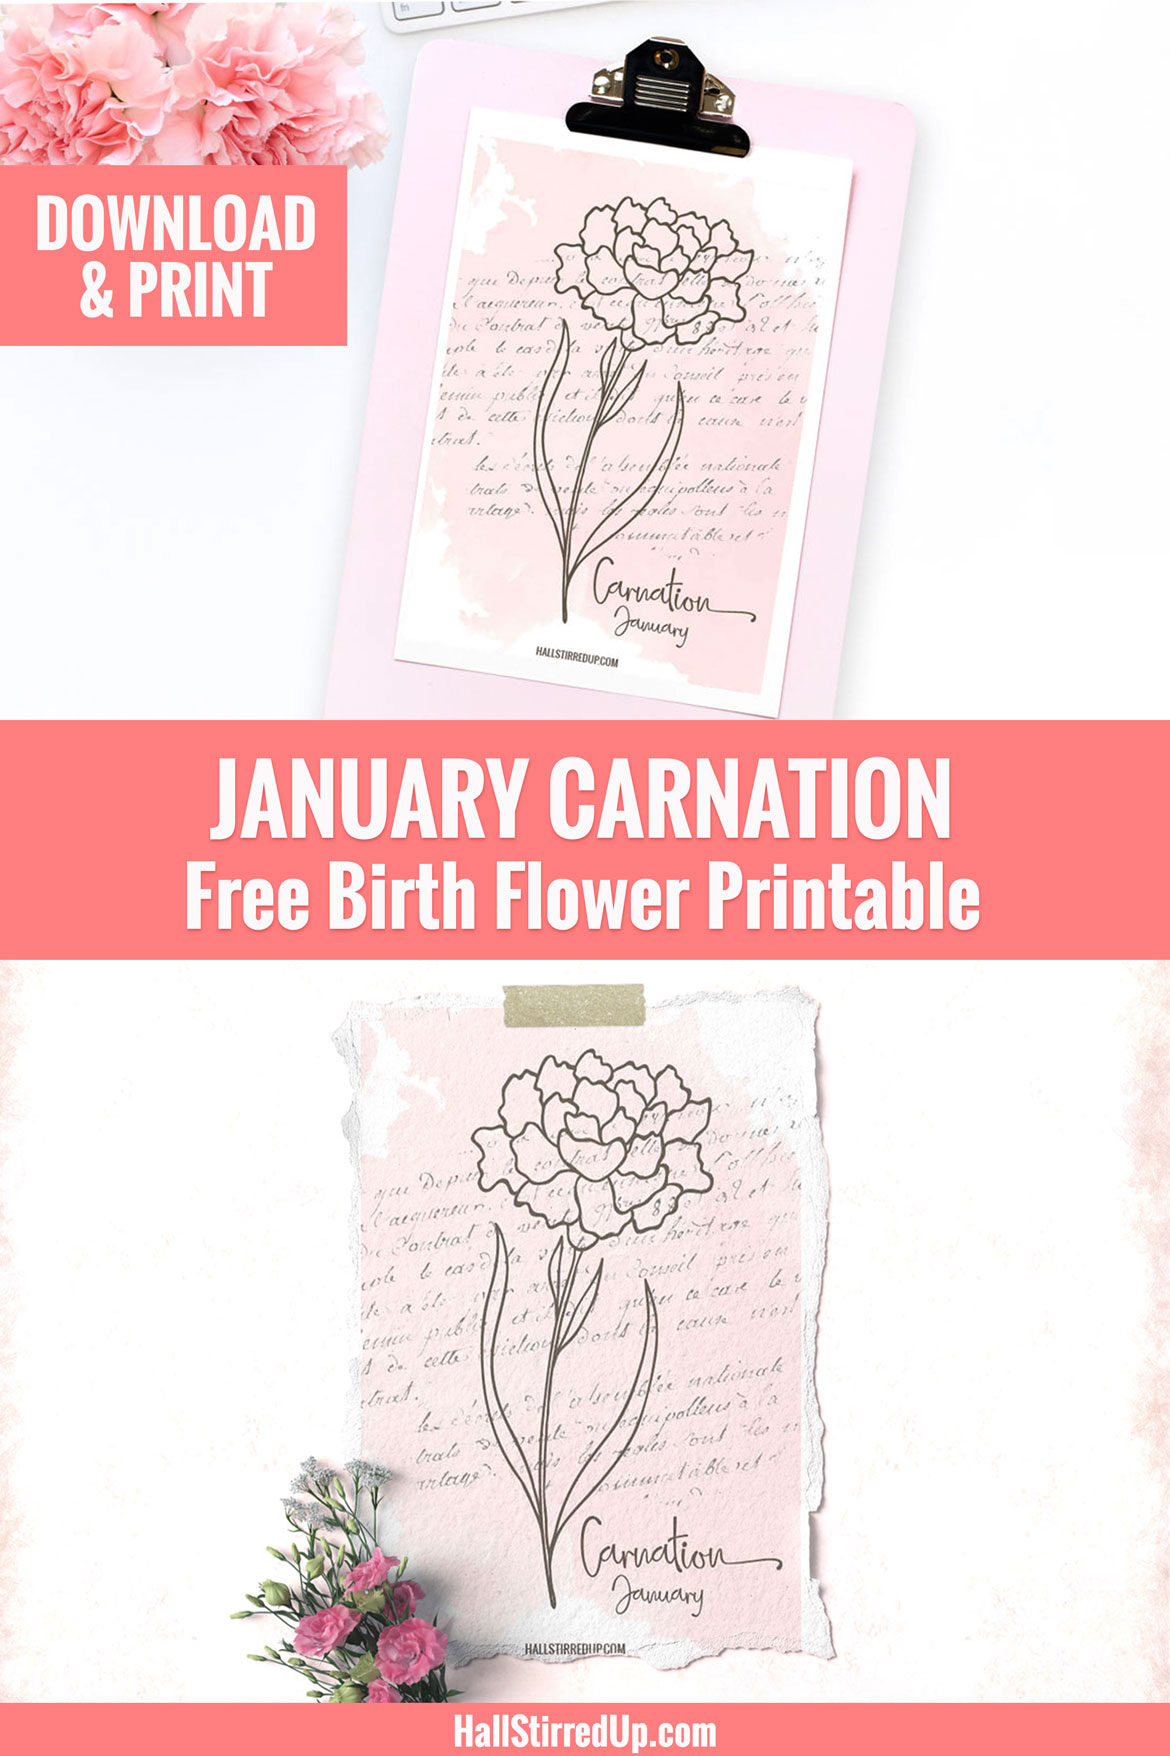 Carnation is January's Birth Flower - new series includes free printable